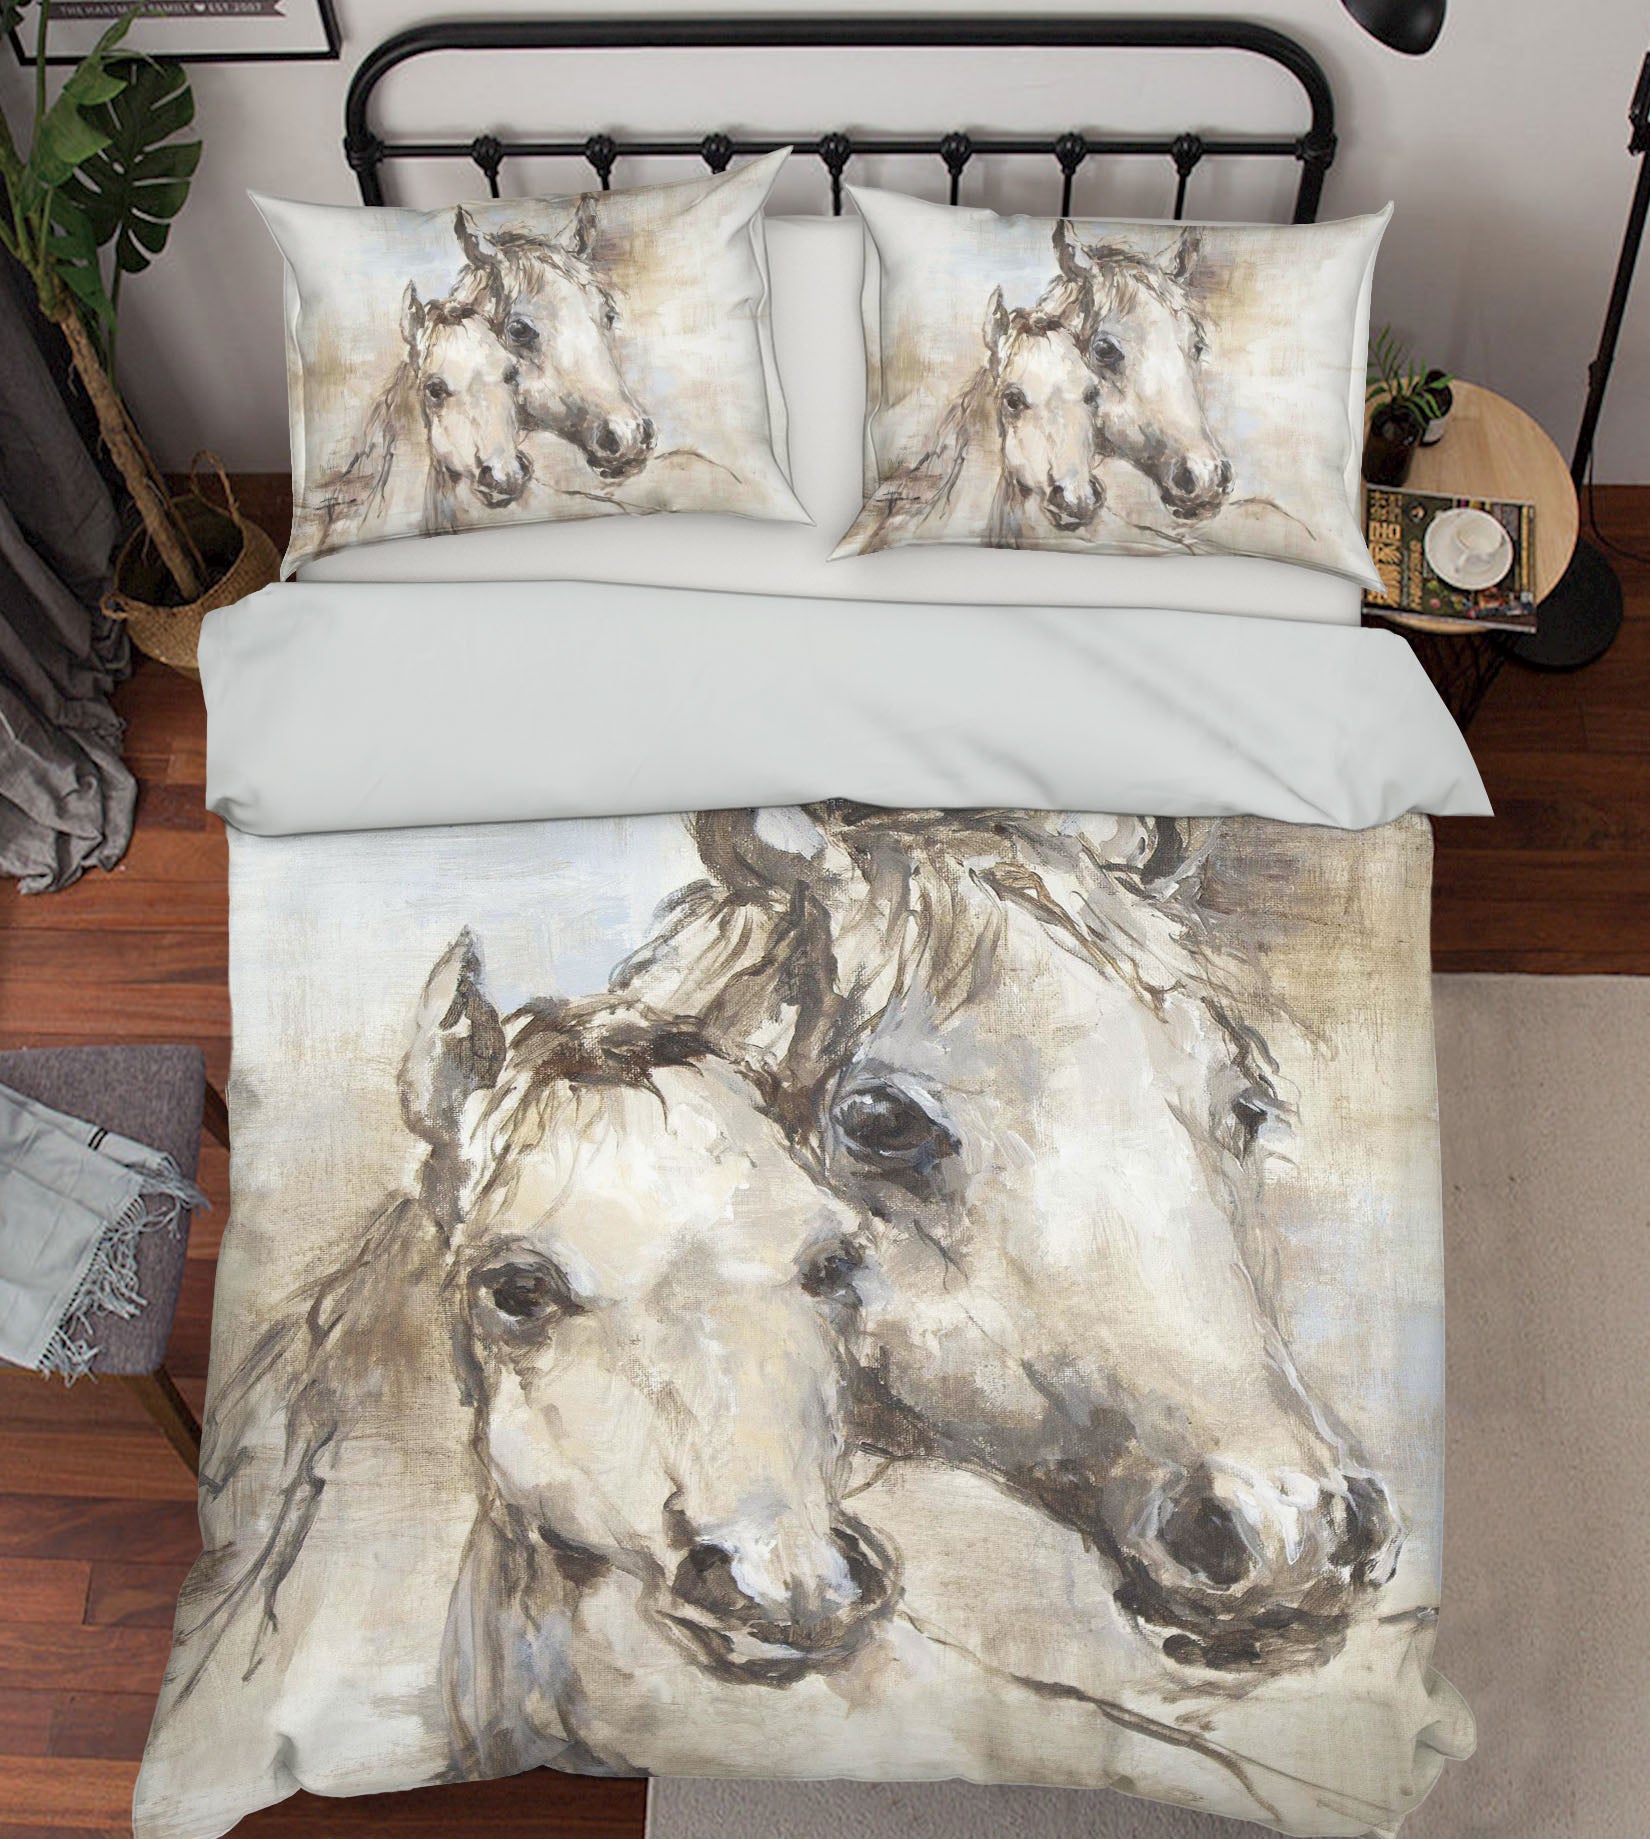 3D Painted Horse 022 Debi Coules Bedding Bed Pillowcases Quilt